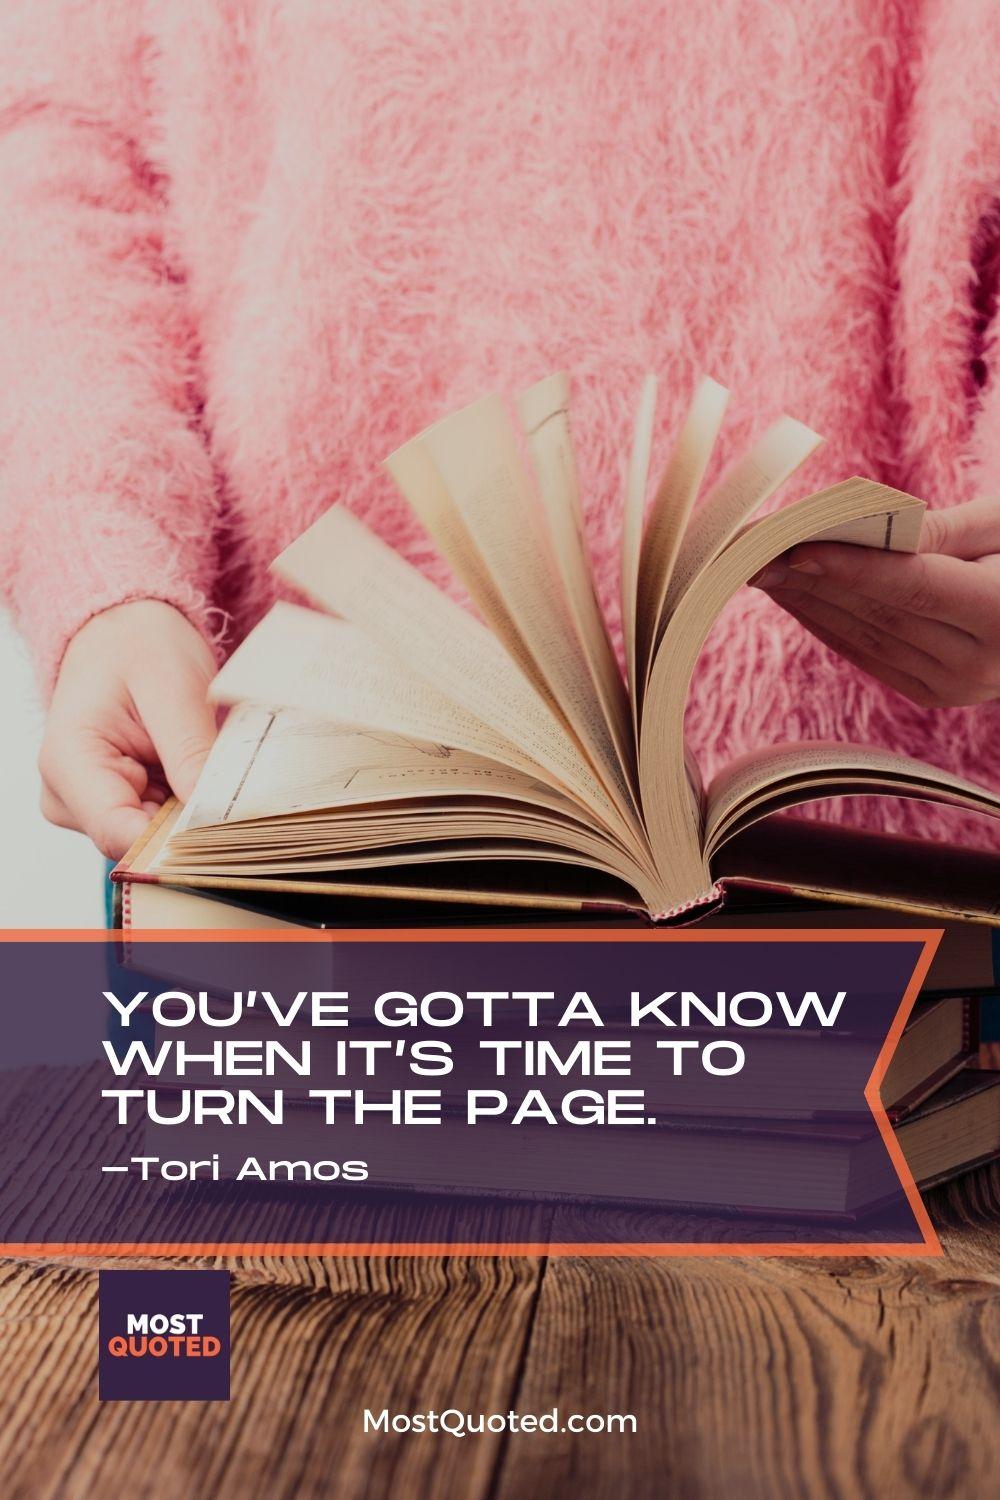 You’ve gotta know when it’s time to turn the page. - Tori Amos